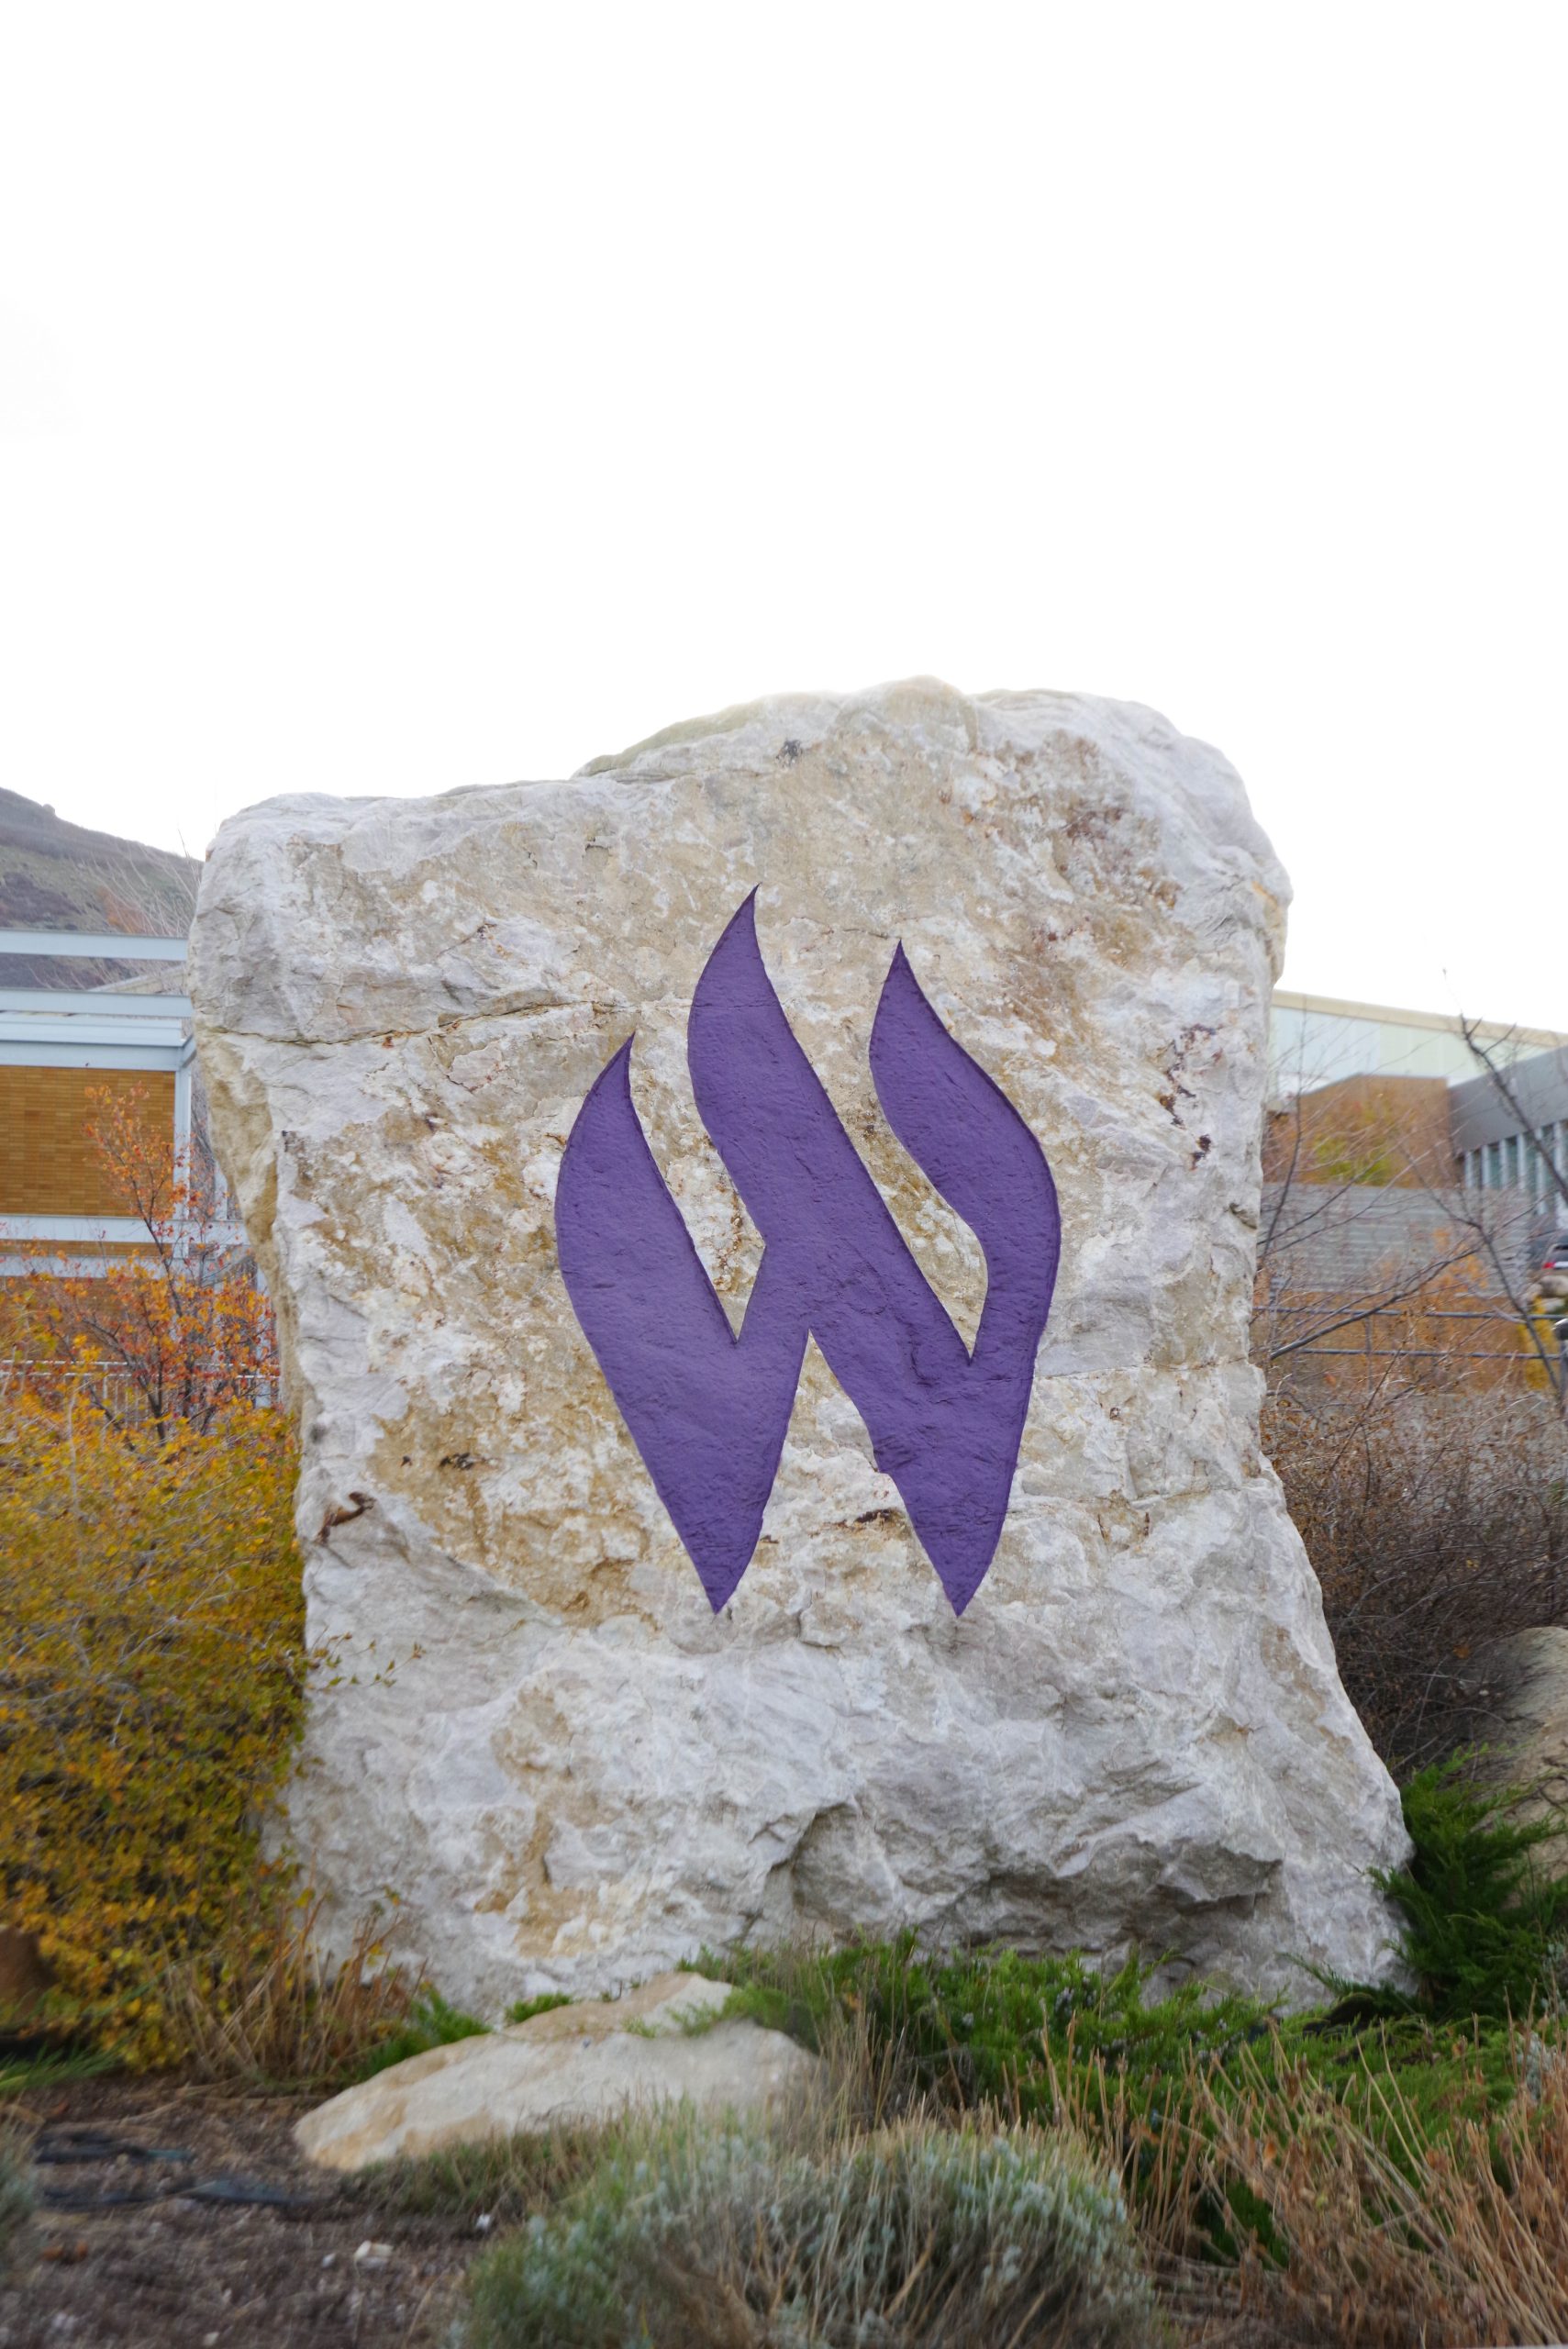 The W rock at Weber State.